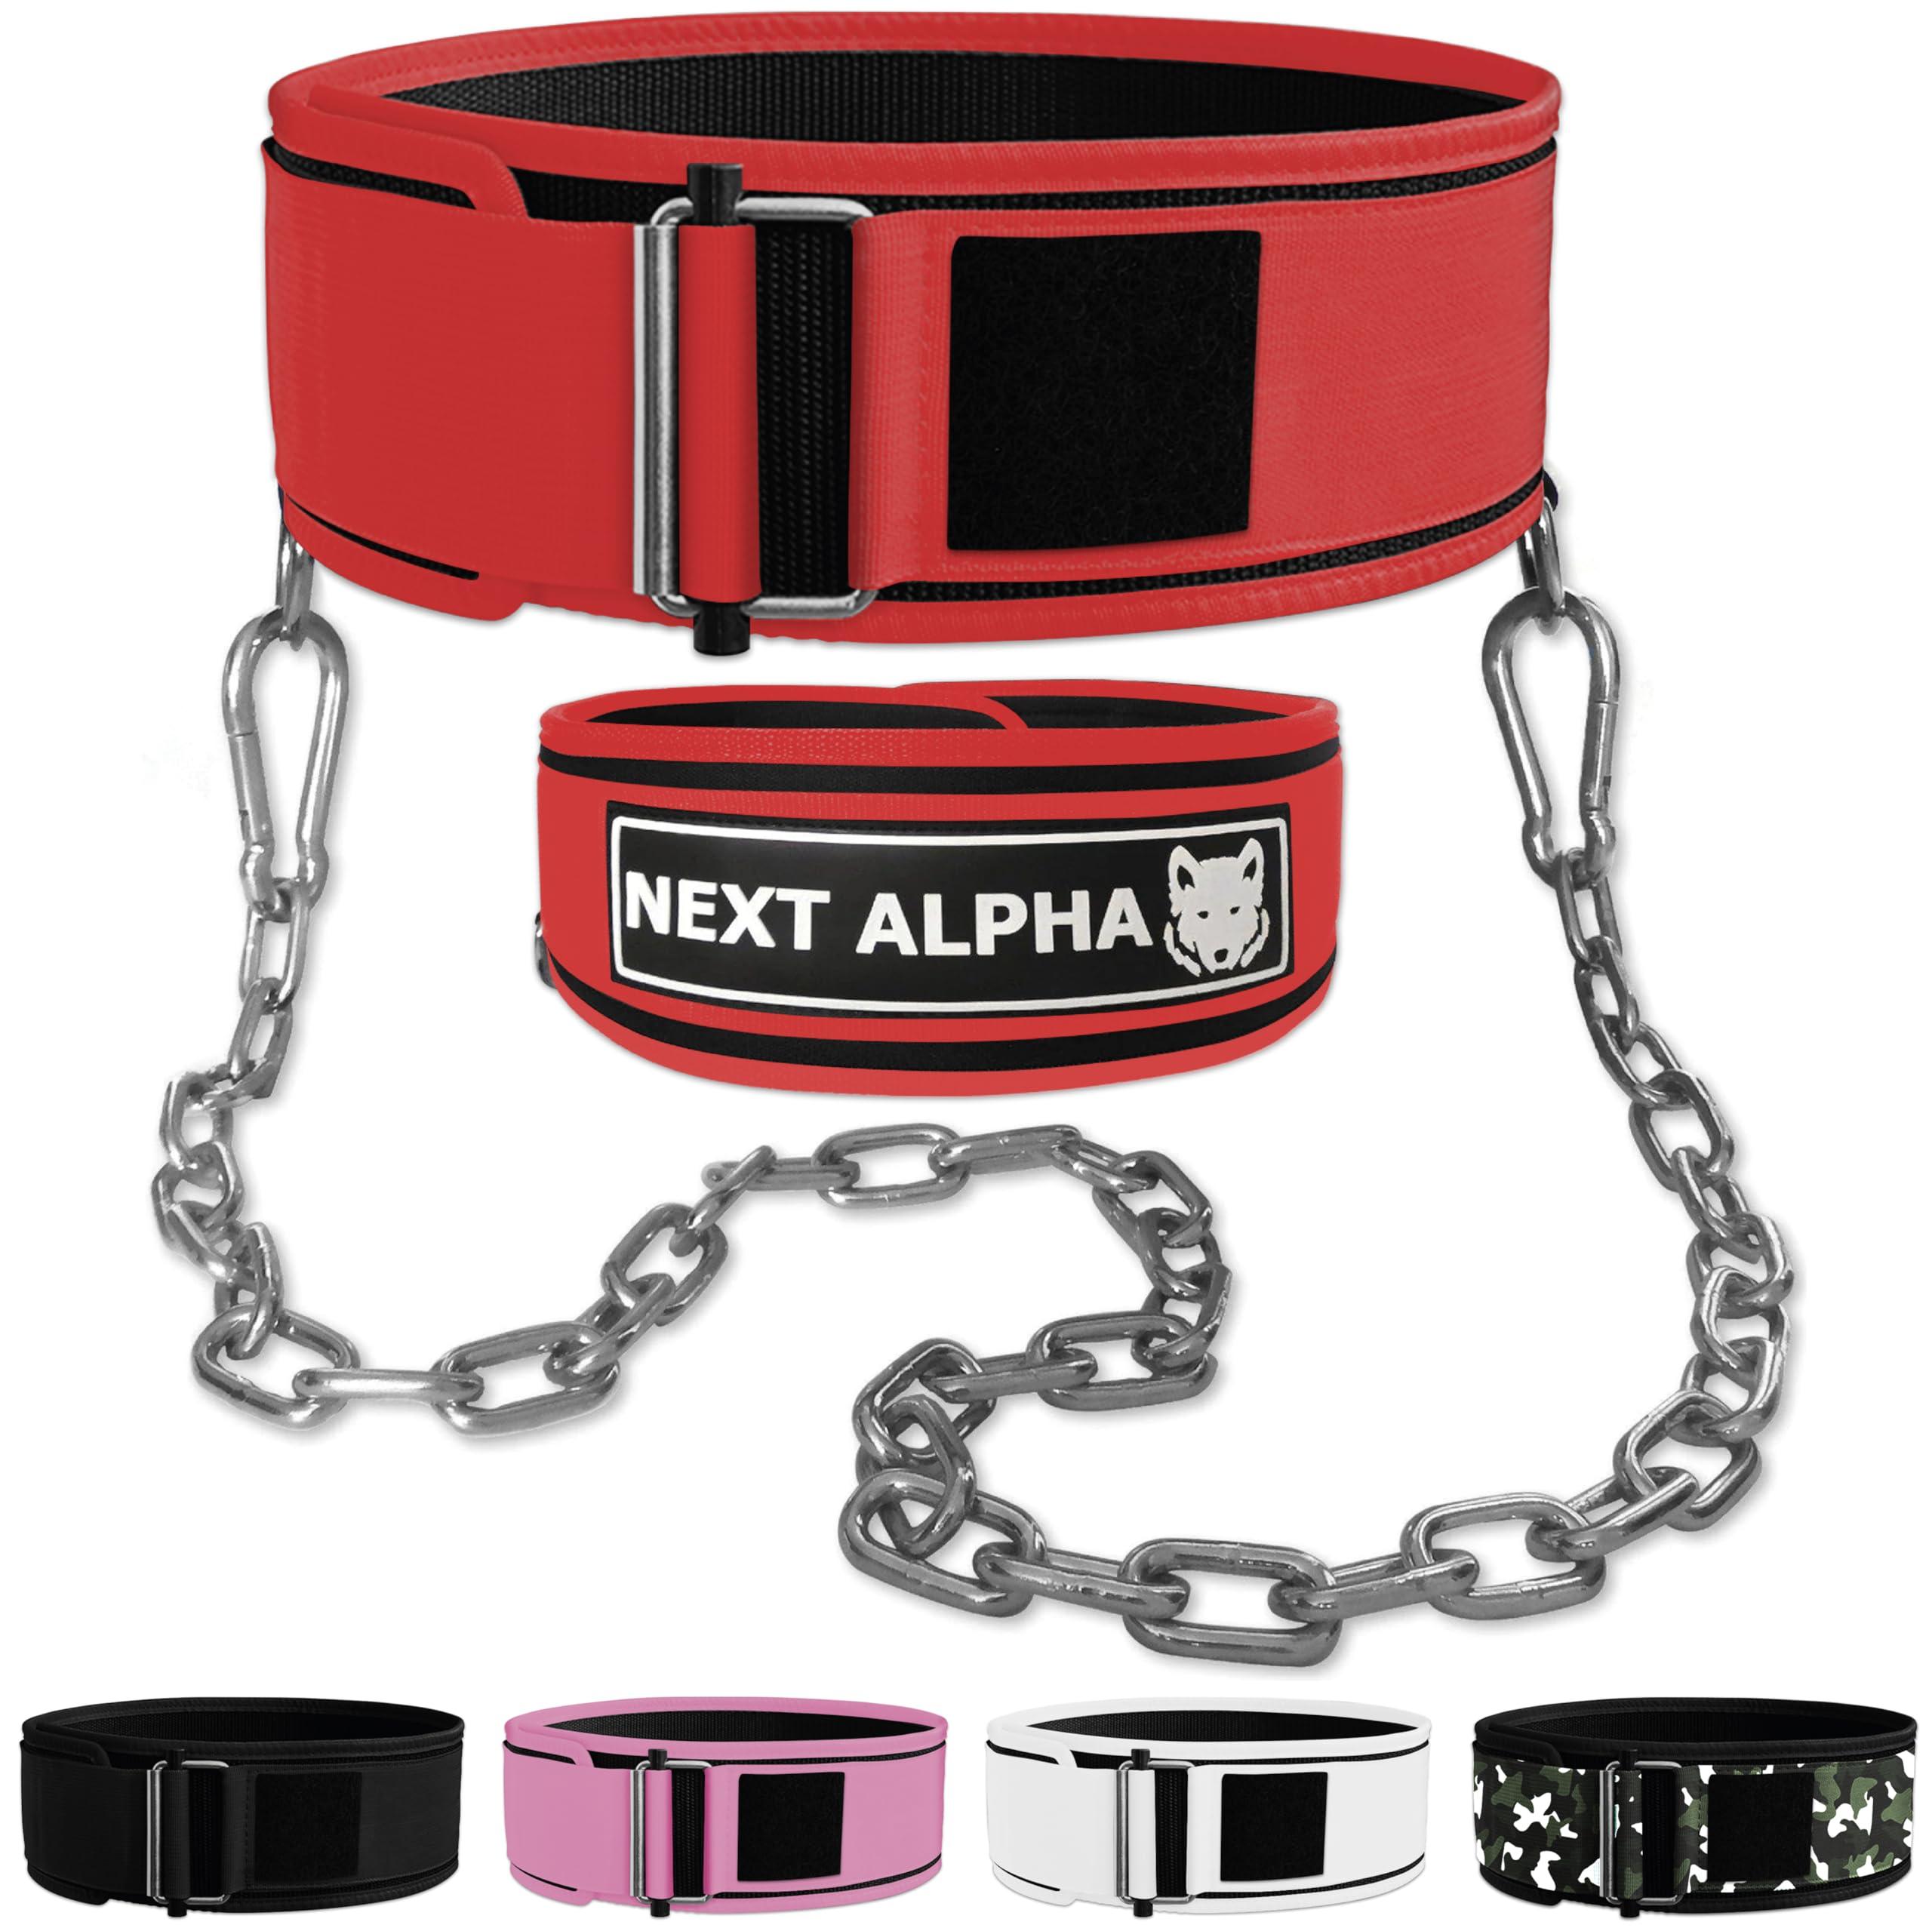 Next Alpha Weightlifting Belt & Dip Belt Combination - Custom Weight Lifting Belt for Men and Women - Self-Locking & Quick Release Buckle - With Chain - Red - Extra Large 0